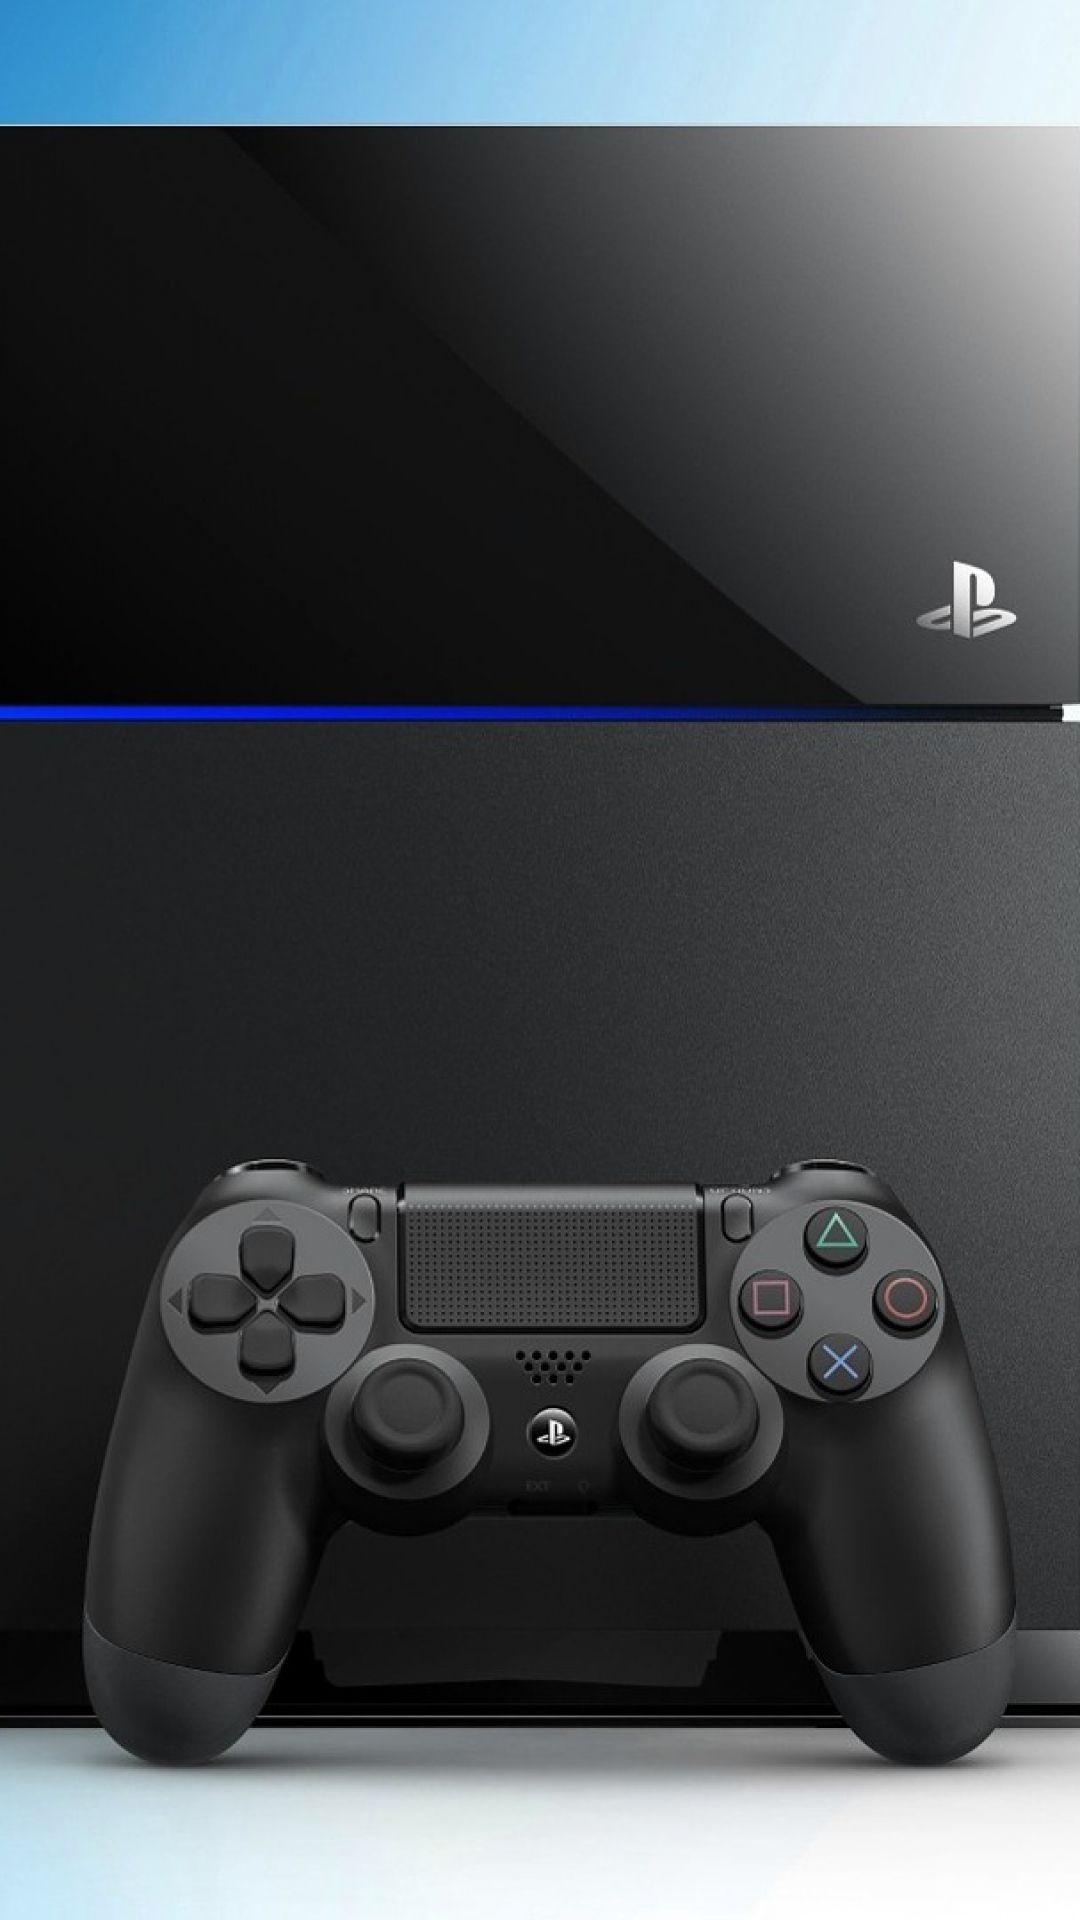 Ps4 Console Wallpapers Top Free Ps4 Console Backgrounds Wallpaperaccess